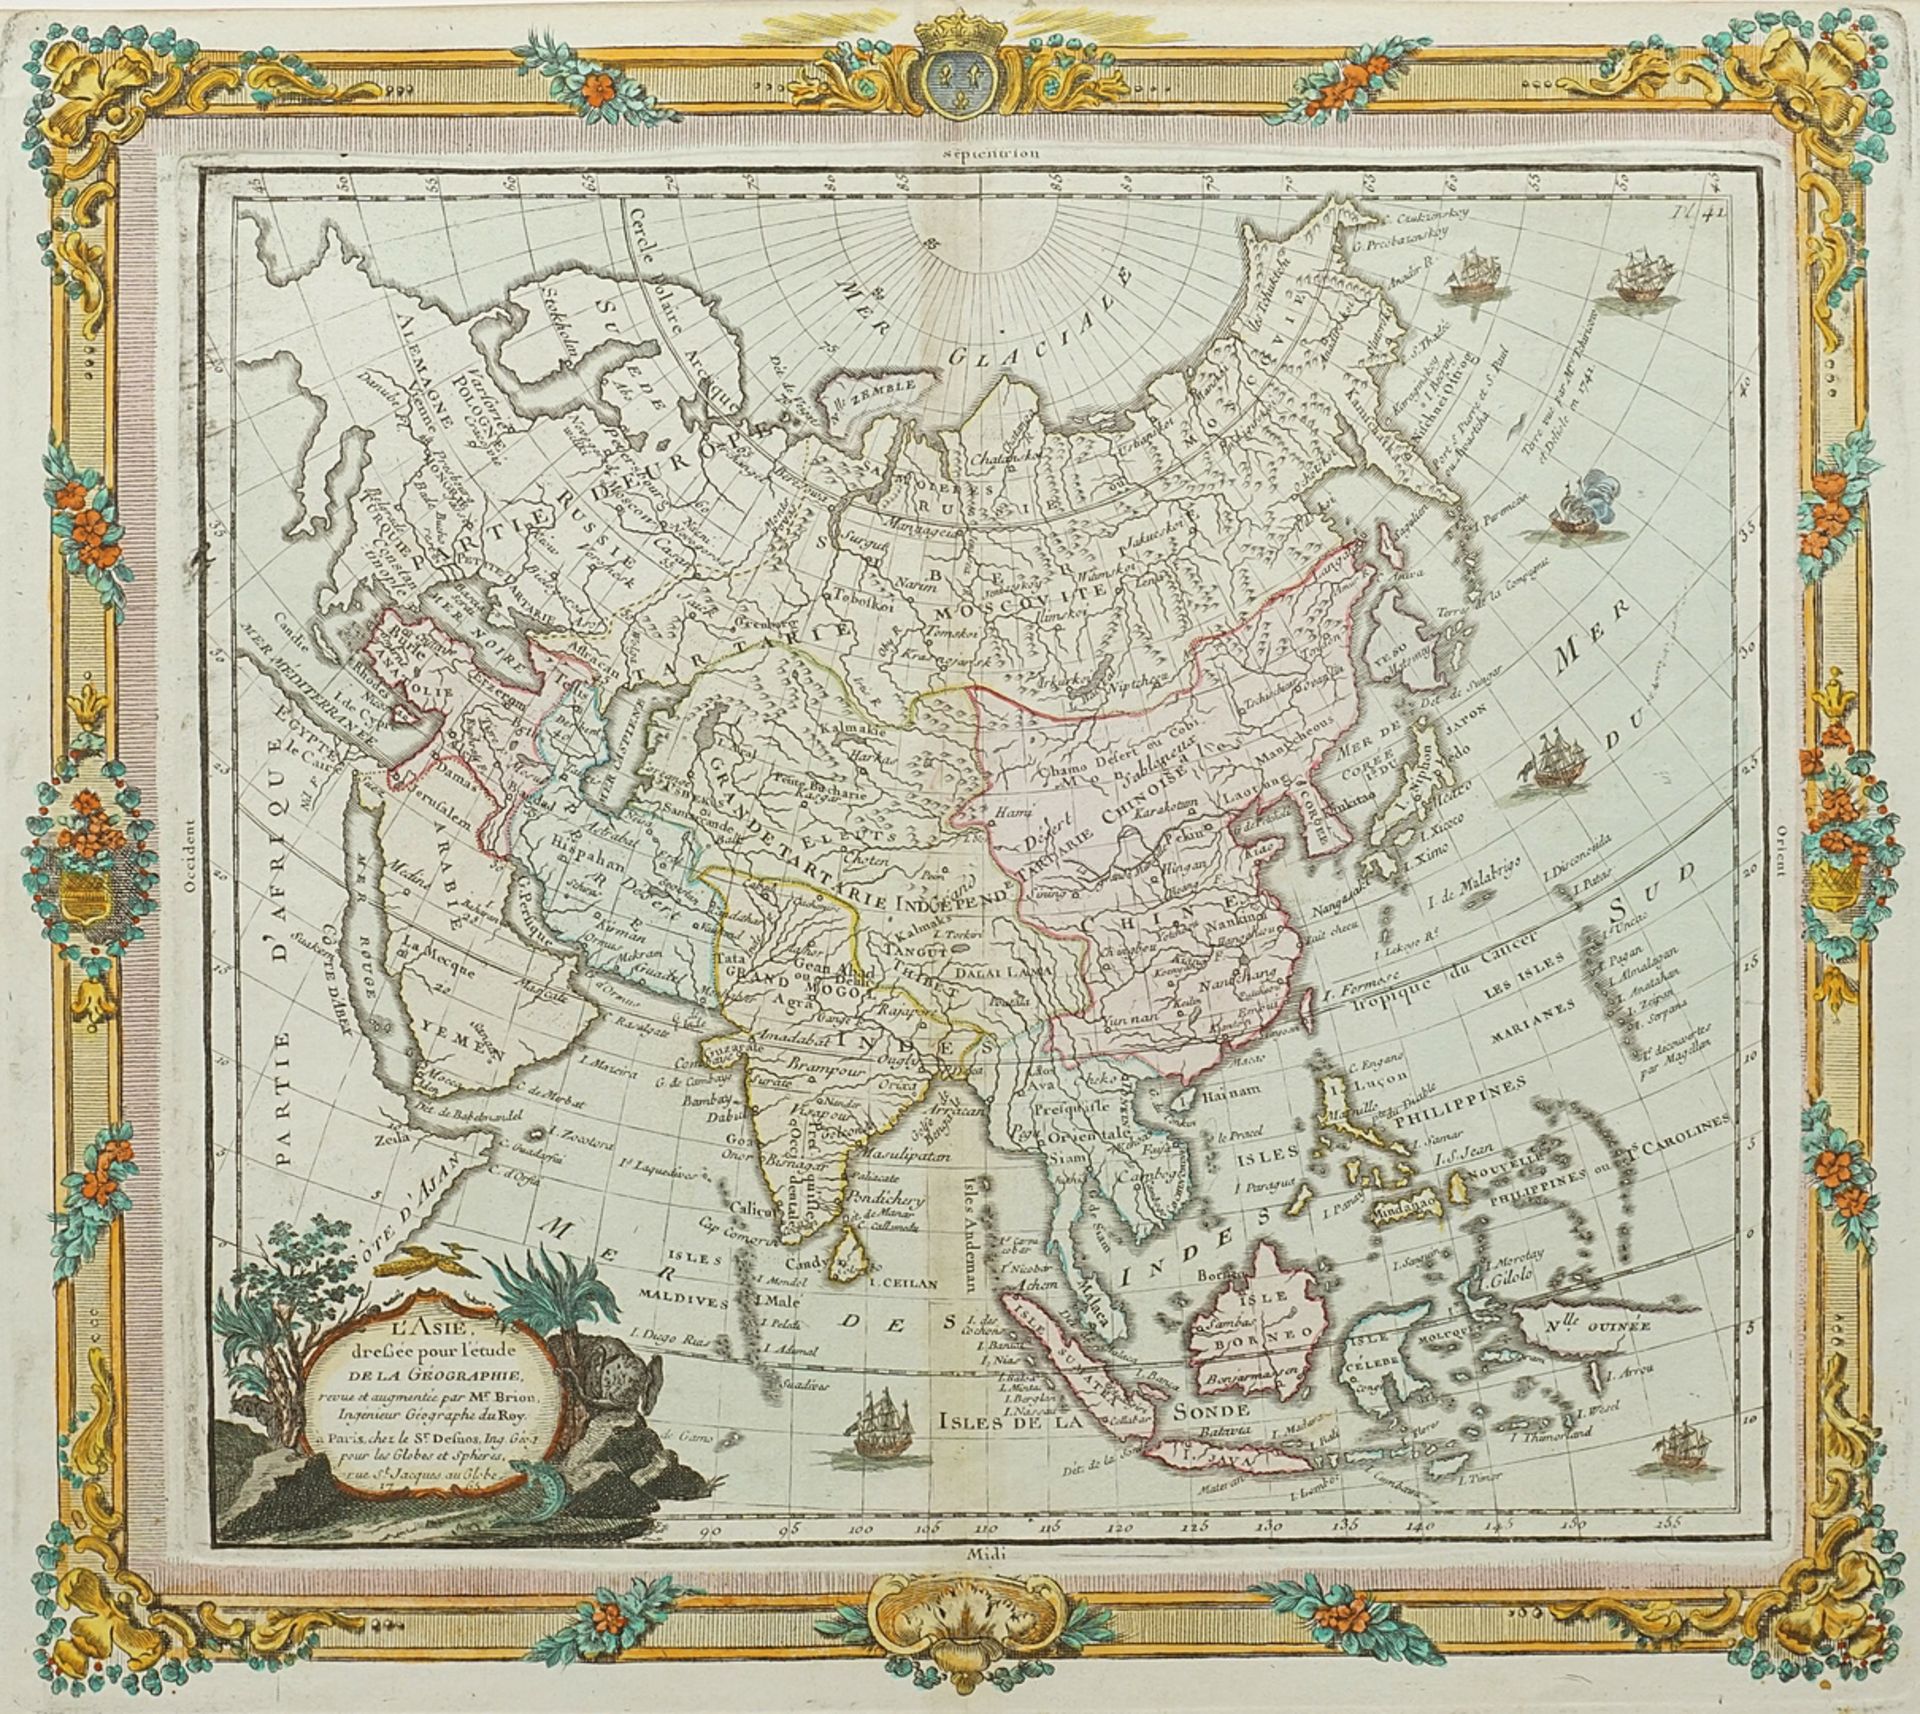 Louis Charles Desnos (1725-1805), Map of Asia